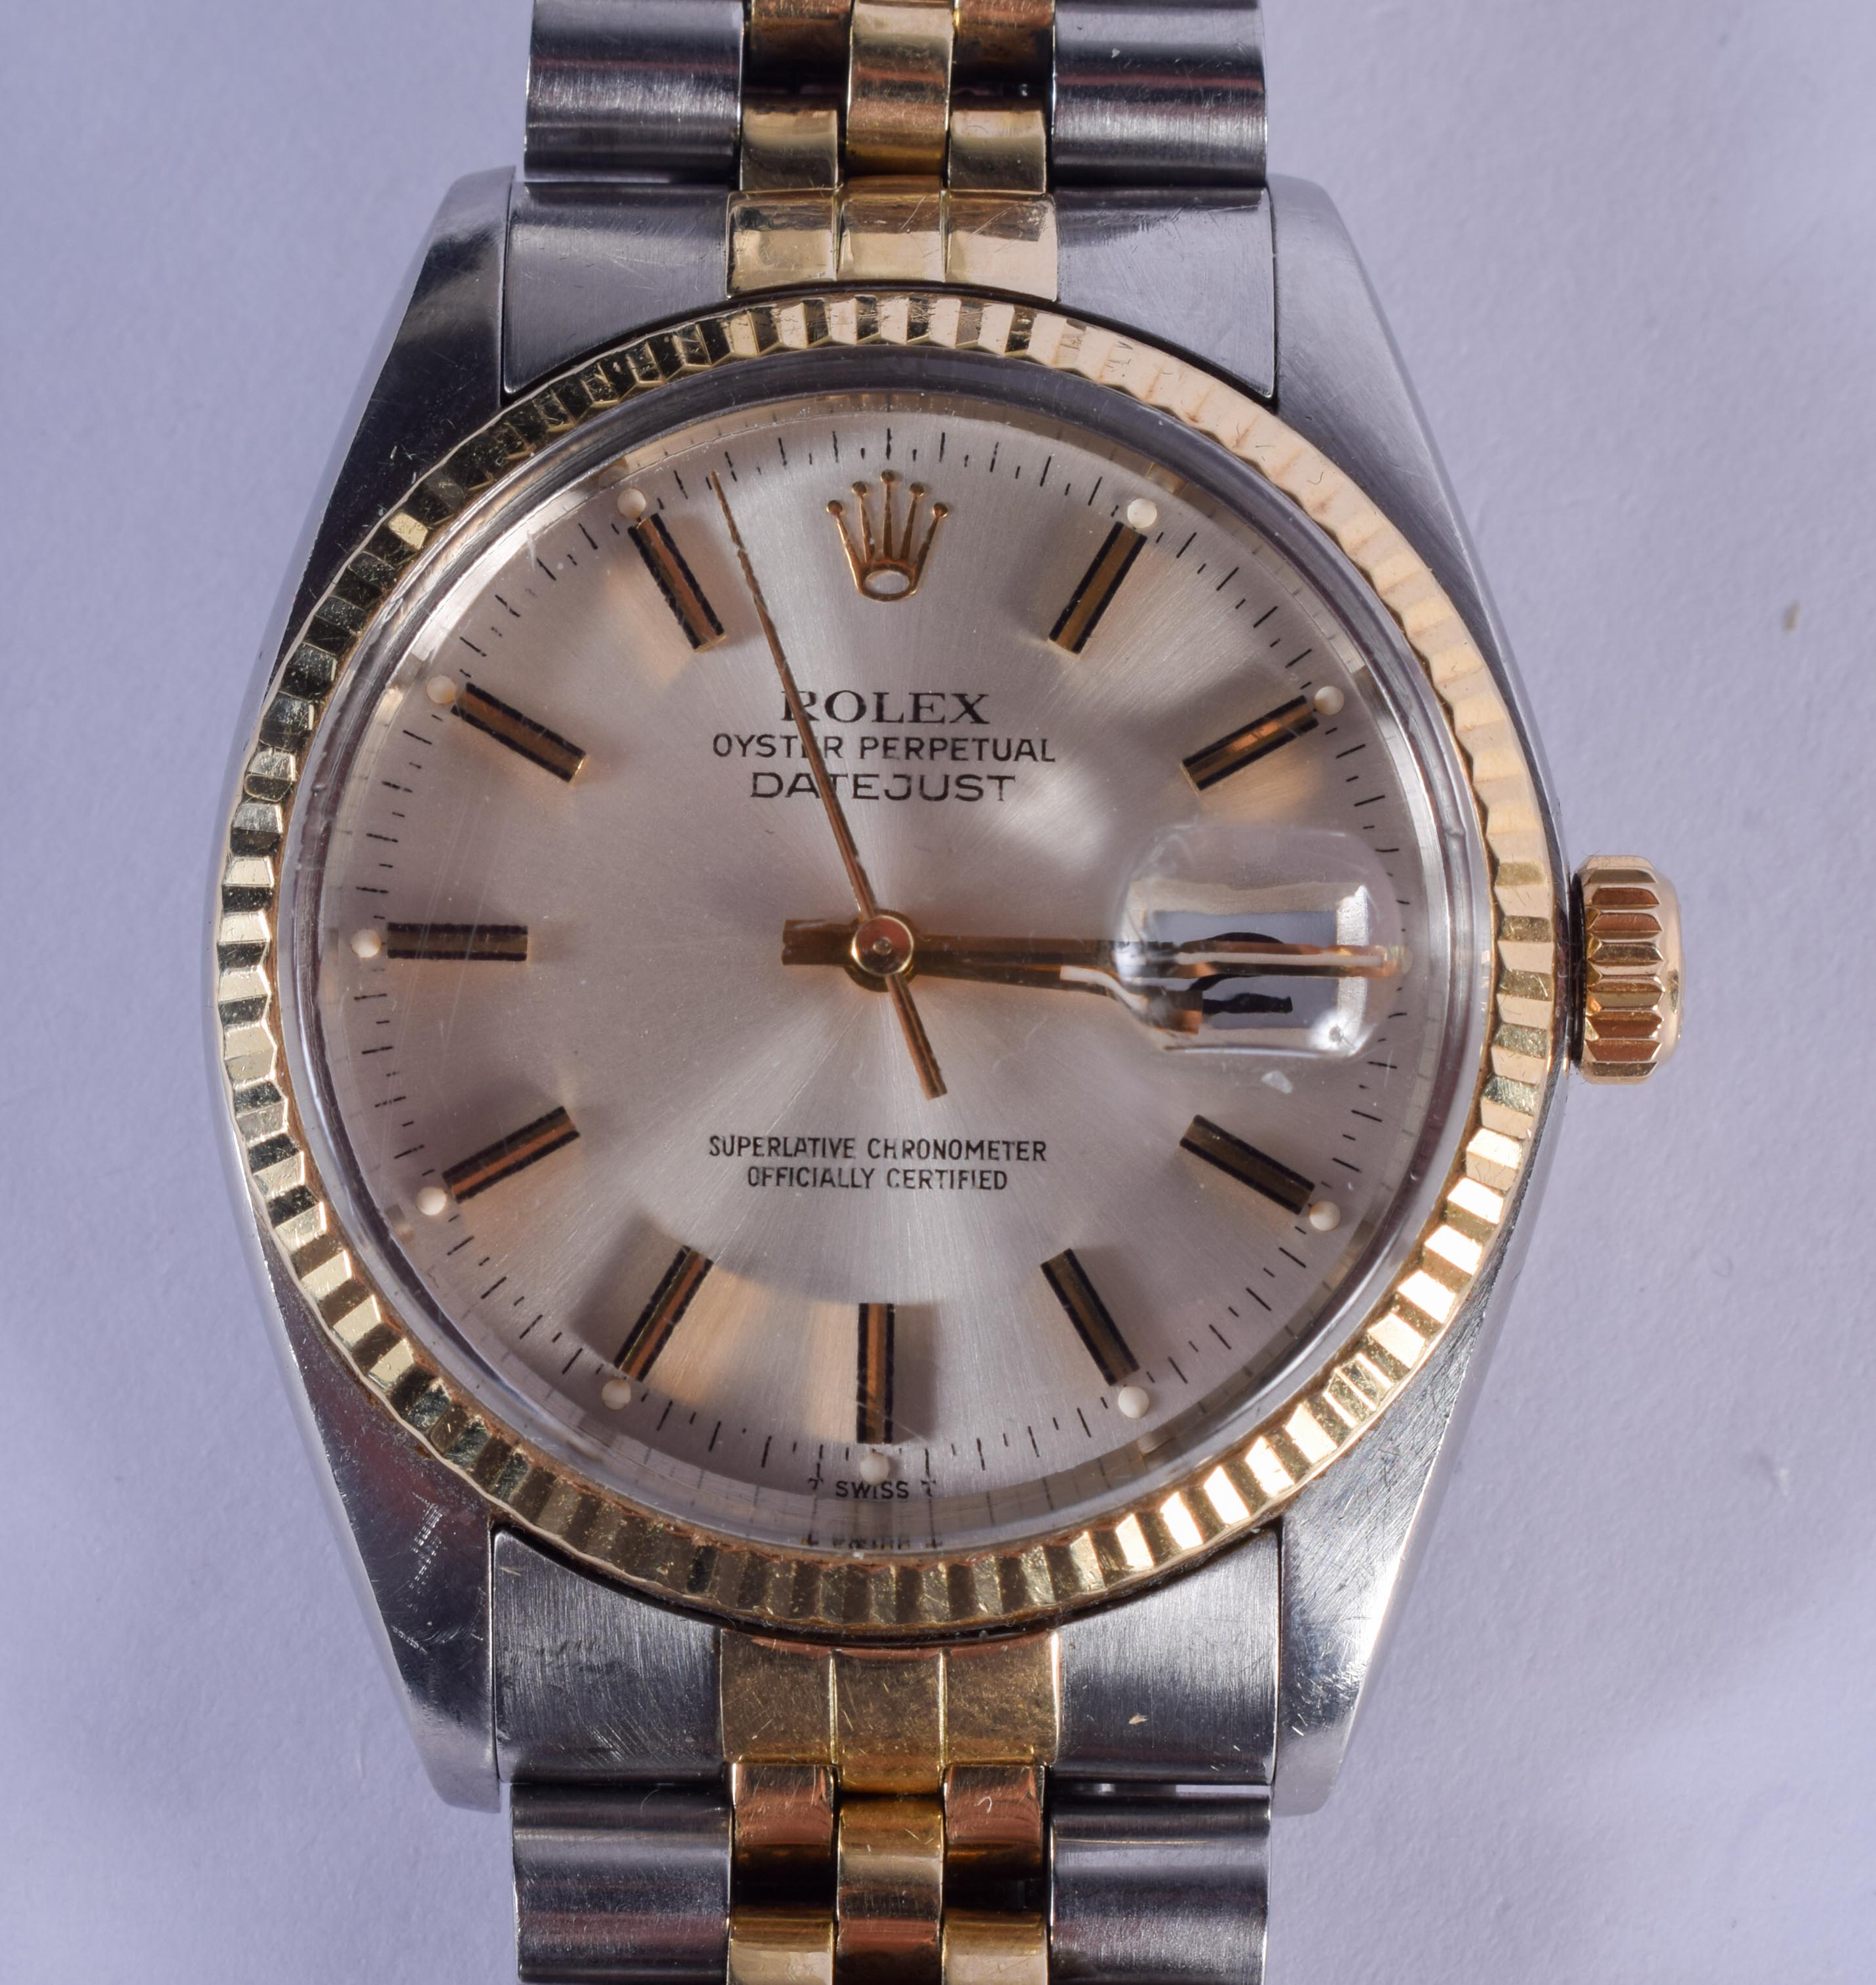 A BOXED ROLEX TWO TONE OYSTER DATE JUST WRISTWATCH. 3.5 cm wide, strap 15 cm long inc clasp.